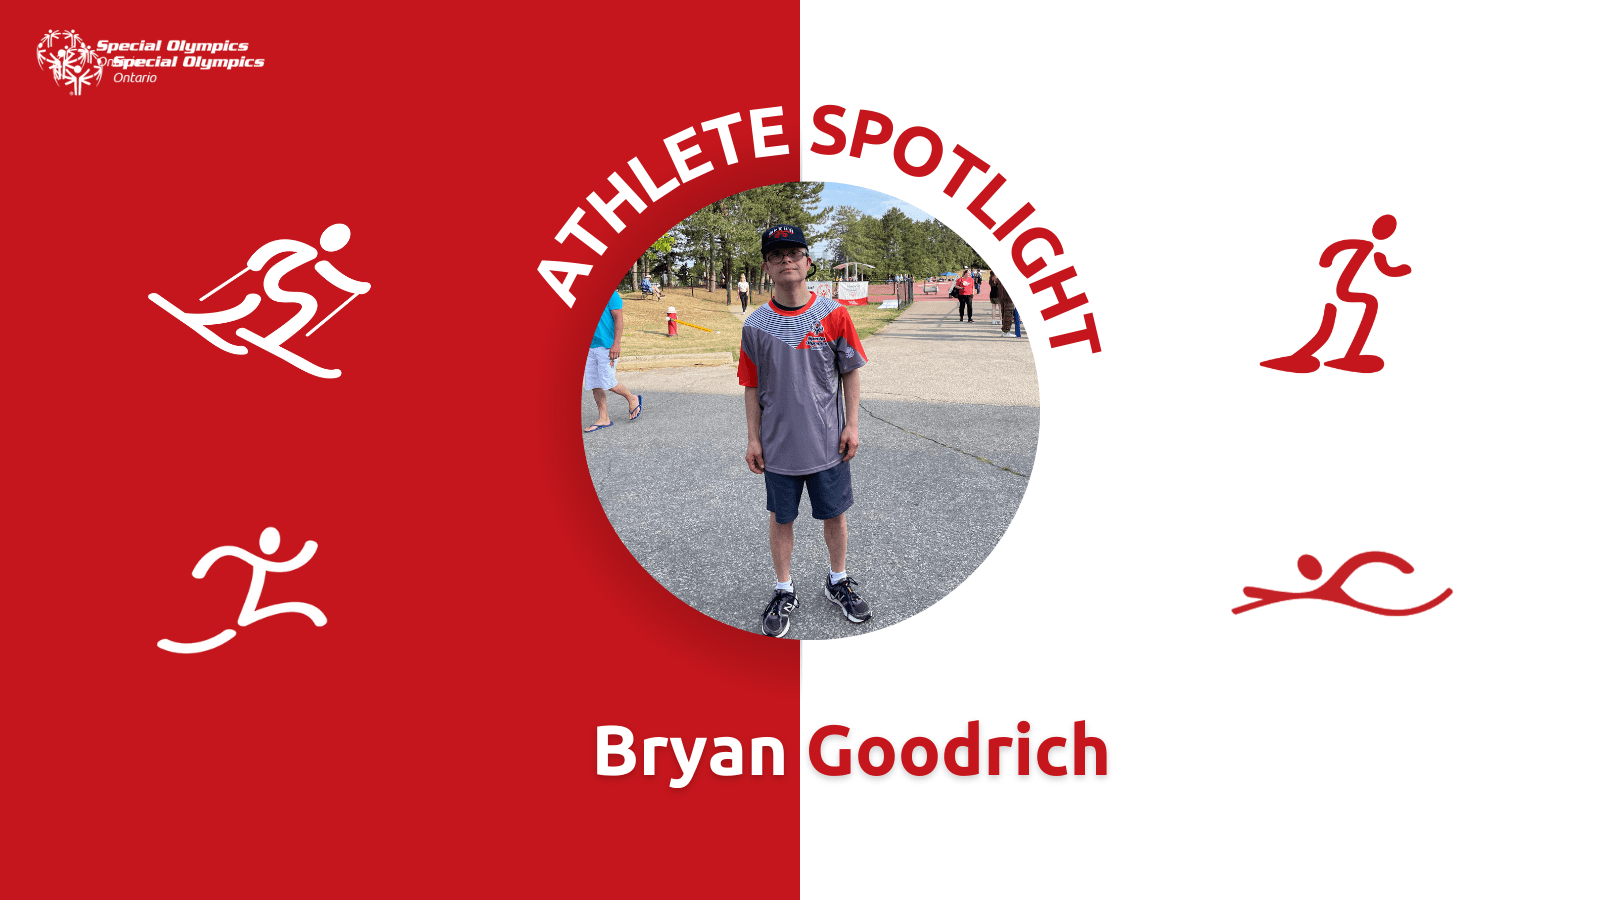 Featured image for “Bryan Goodrich: Celebrating 25 Years of Athletic Excellence in Special Olympics”